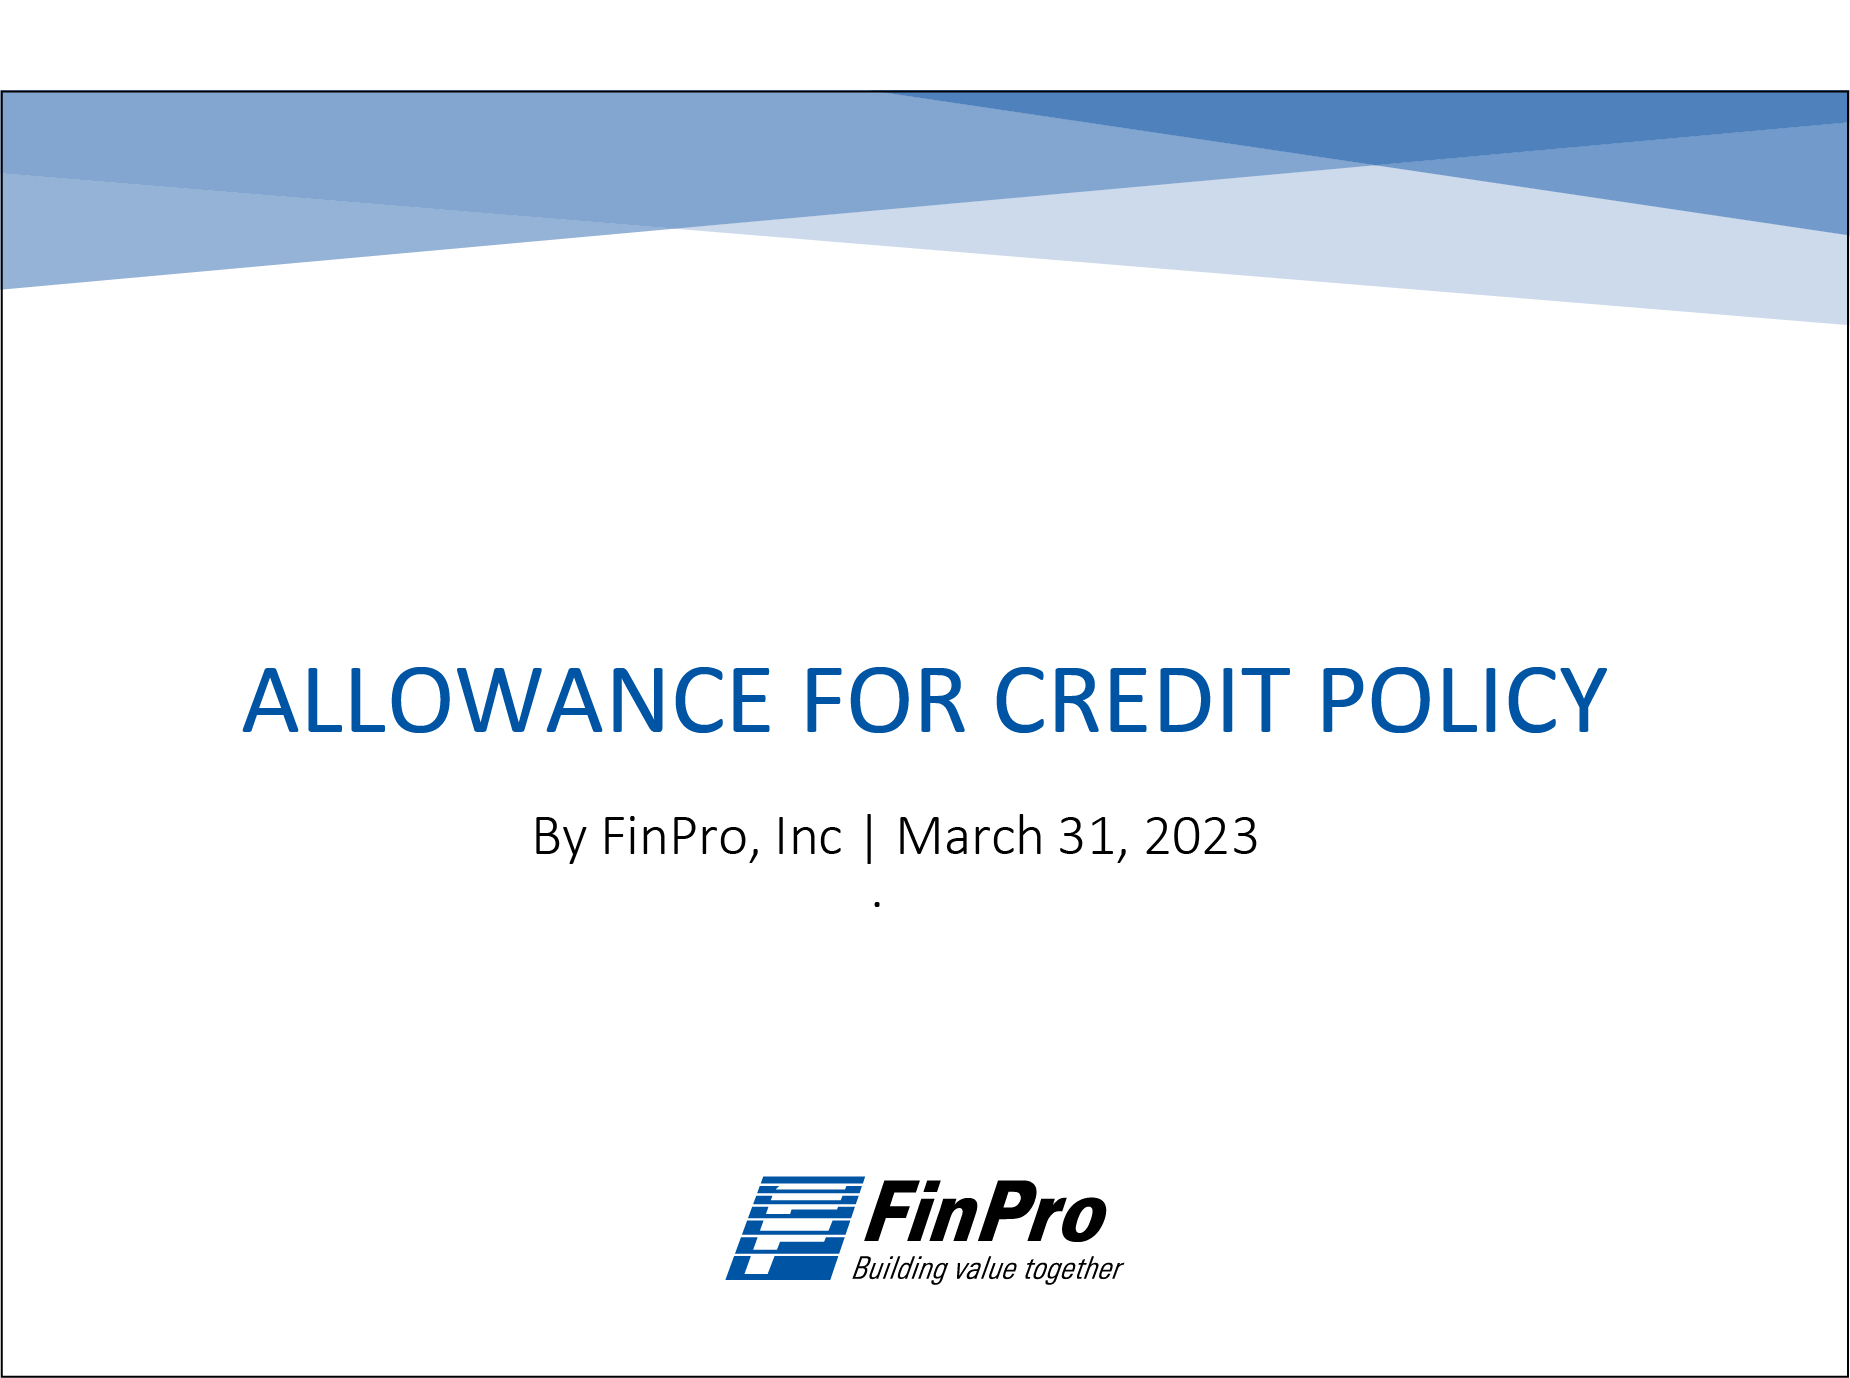 Allowance for Credit Losses Policy 